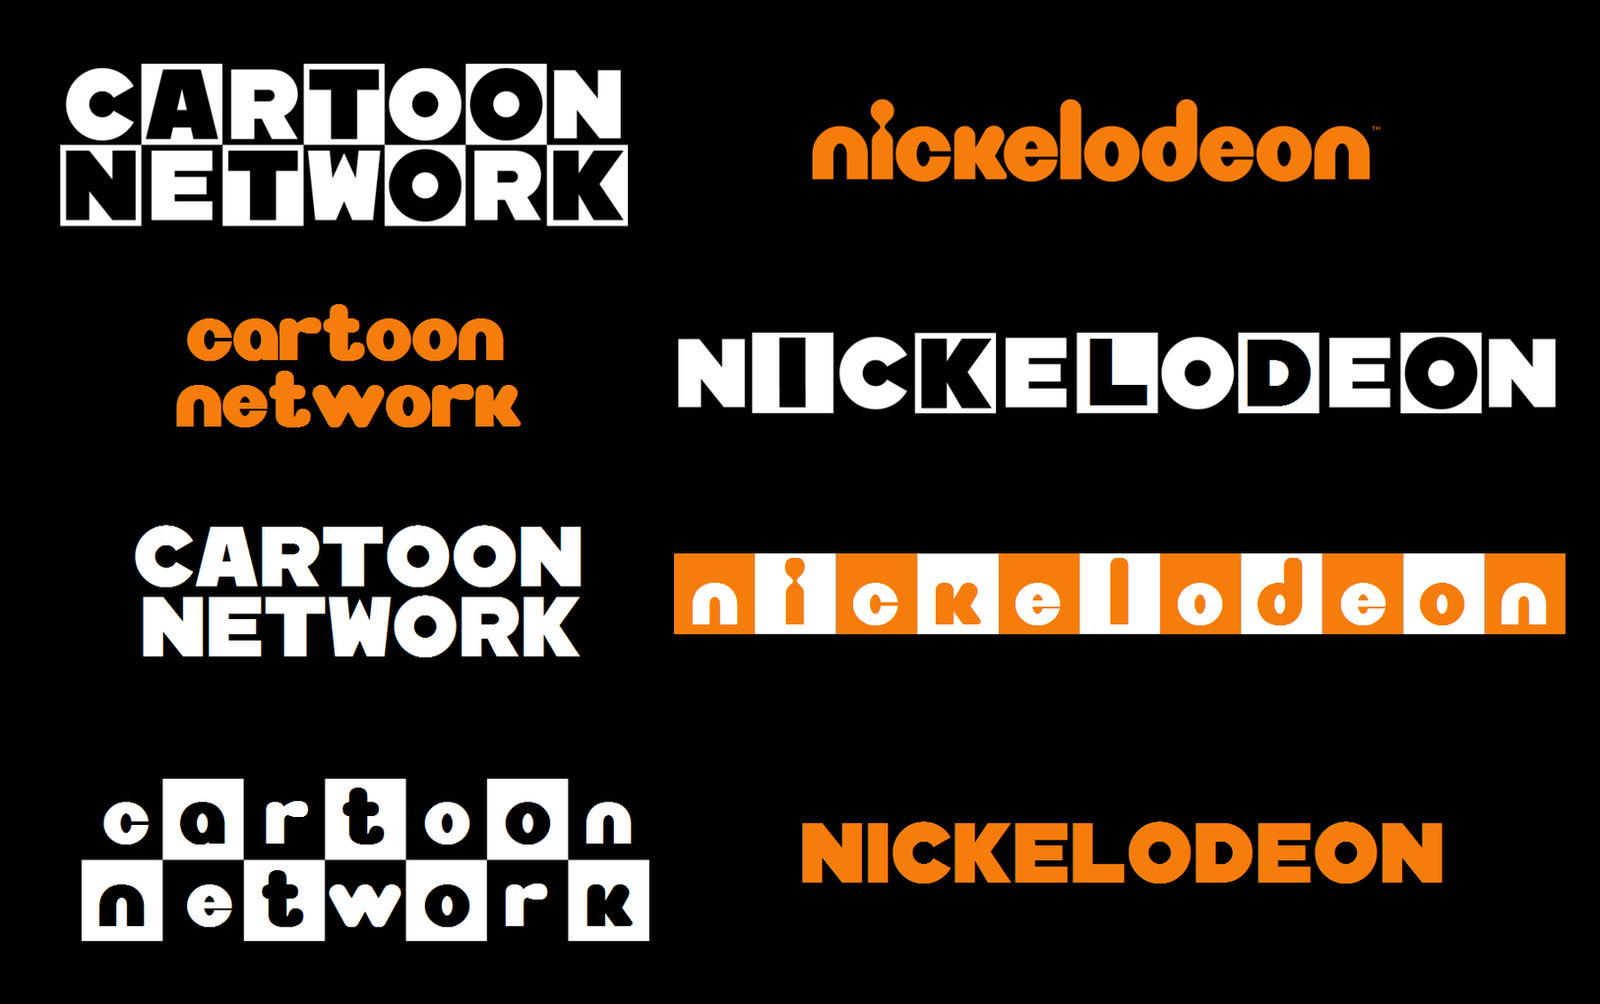 CN and Nickelodeon switch styles (my version) by DannyD1997 on DeviantArt